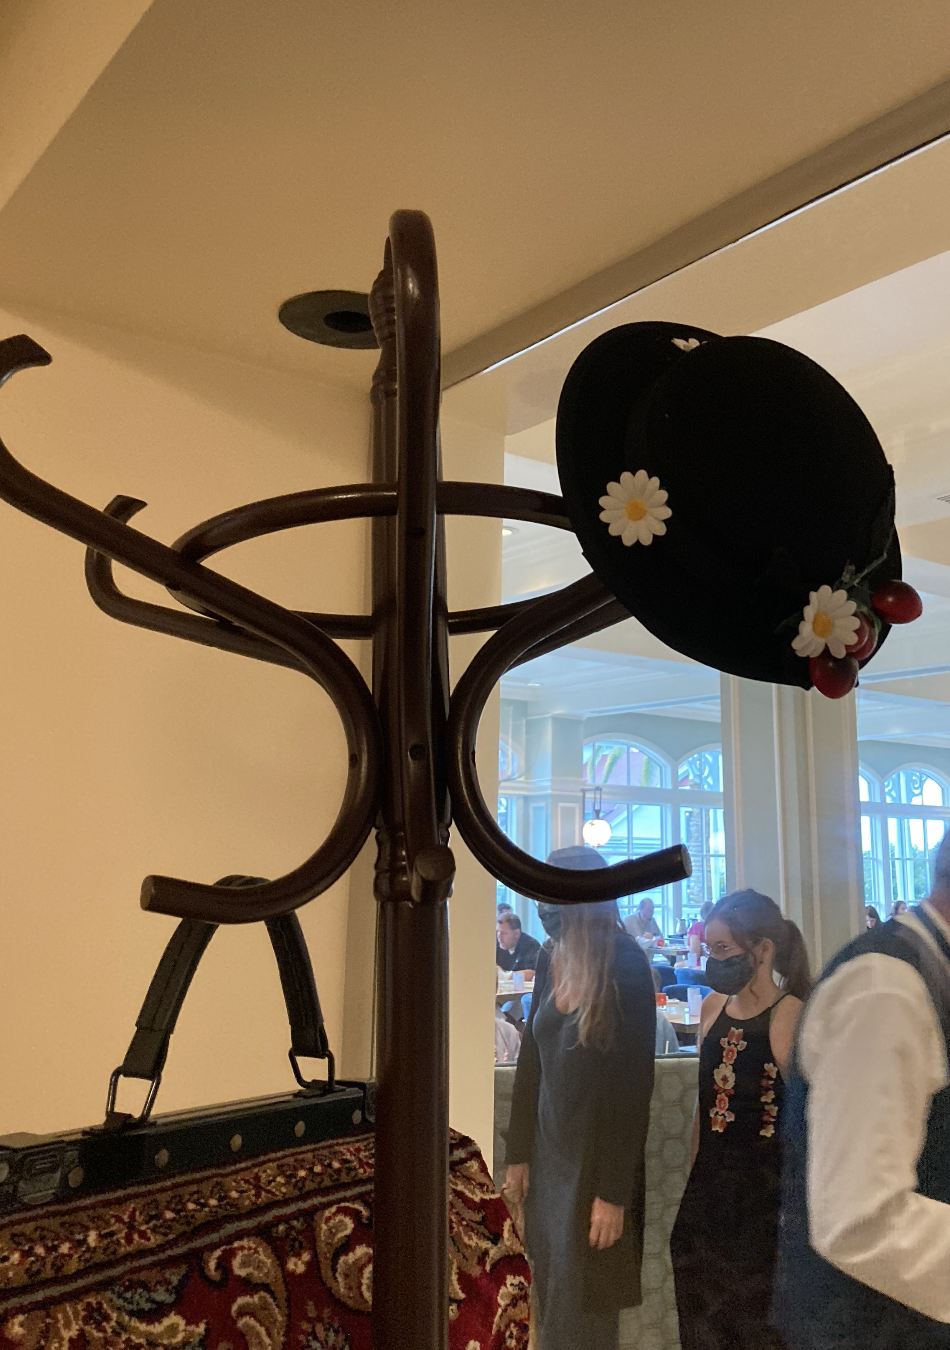 A hat on a hat rack